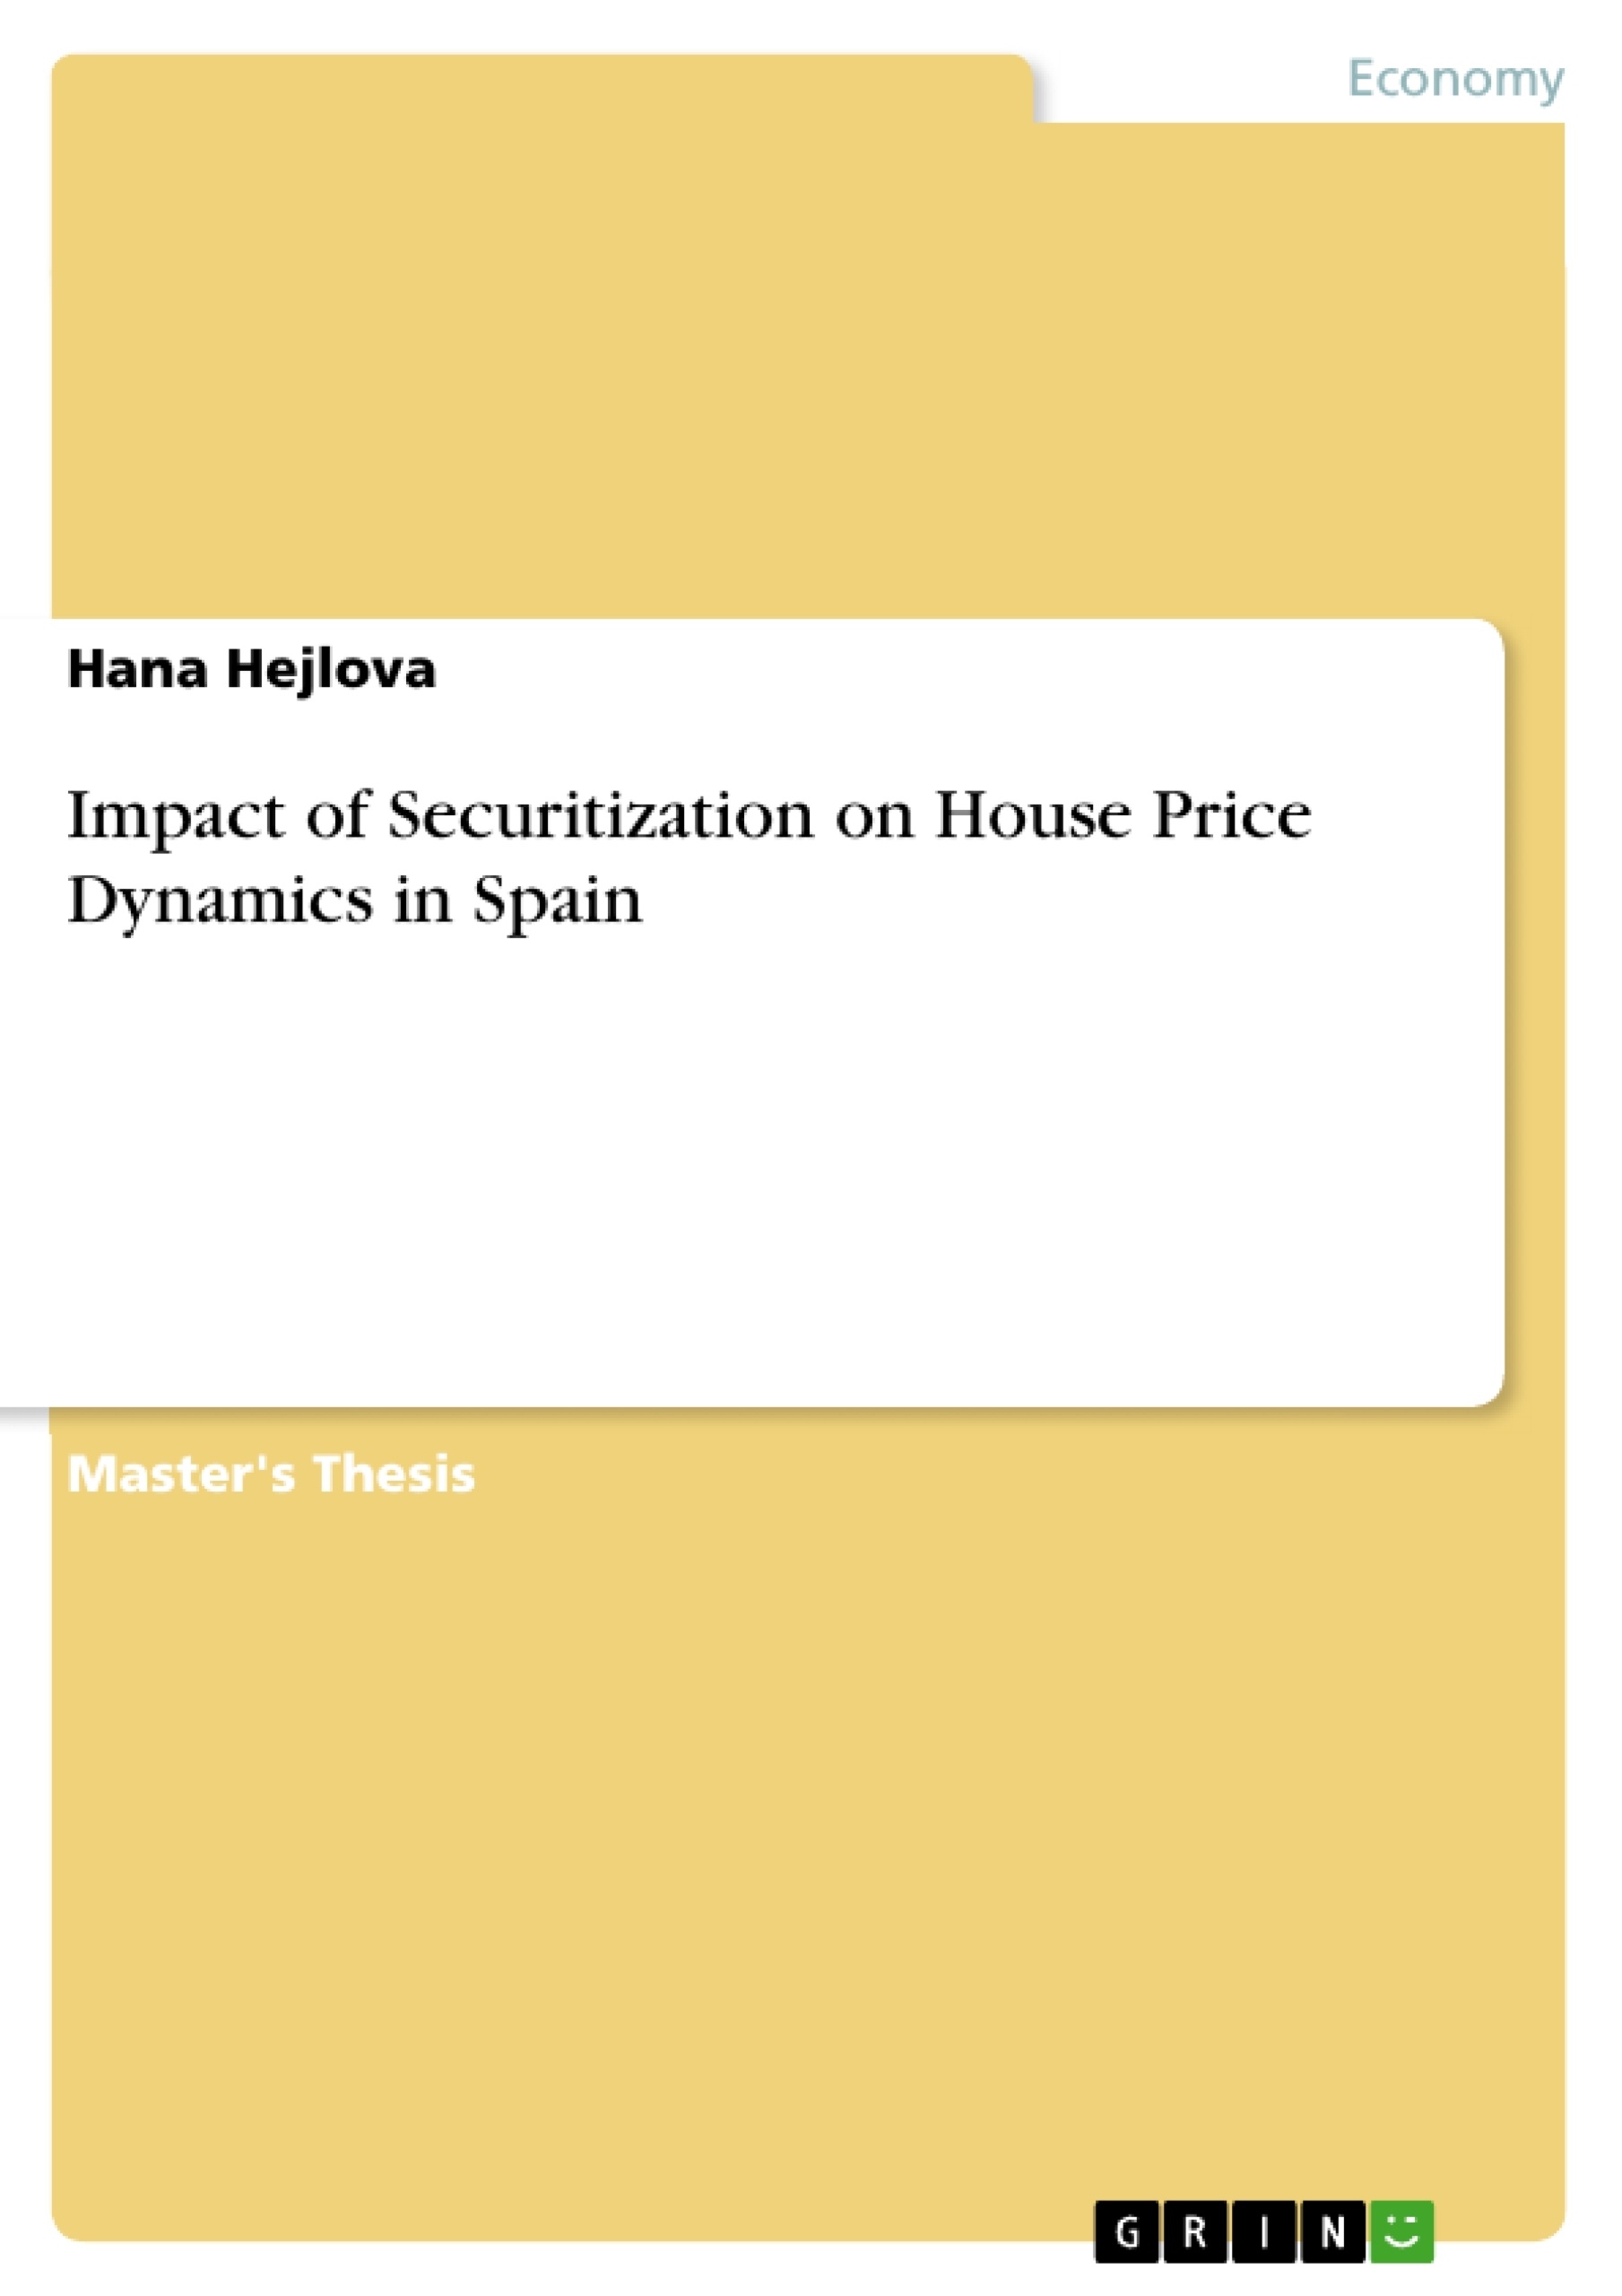 Title: Impact of Securitization on House Price Dynamics in Spain